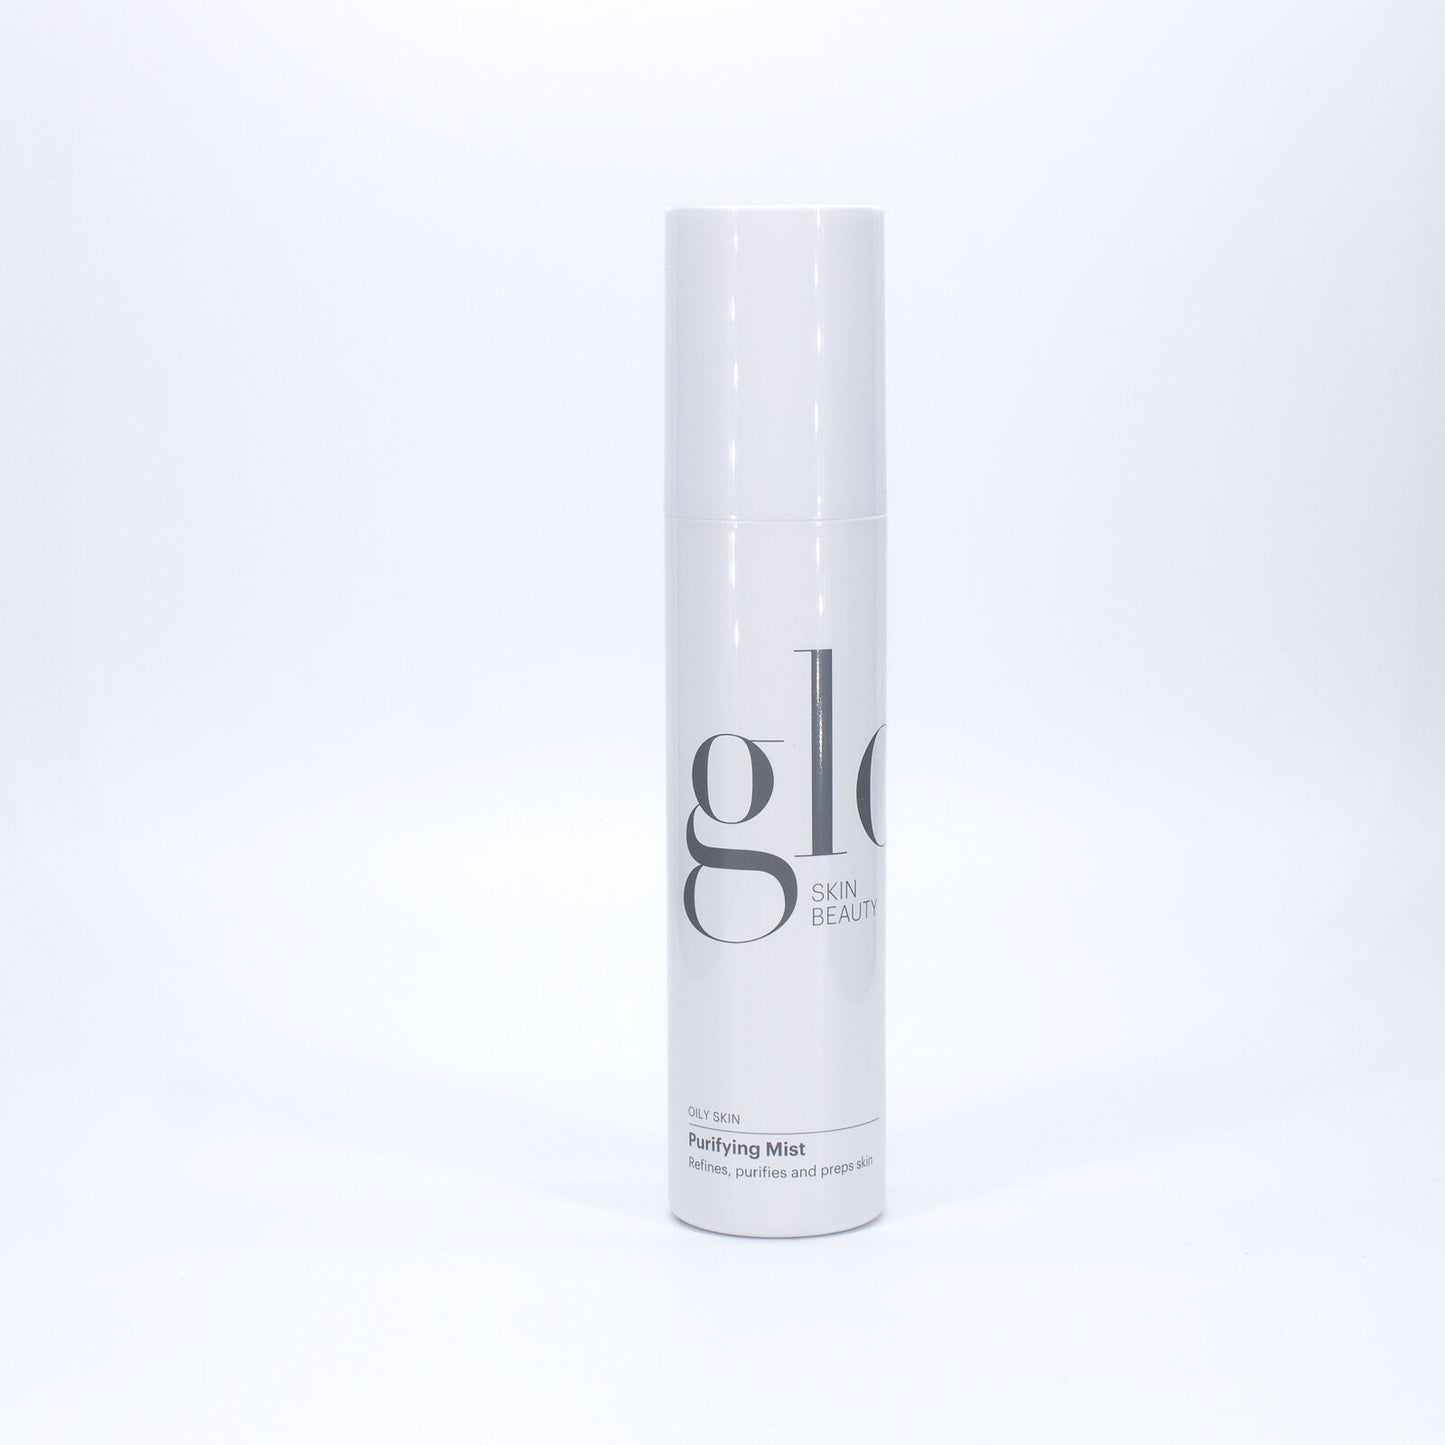 glo SKIN BEAUTY Purifying Mist for Oily Skin 4oz - Small Amount Missing